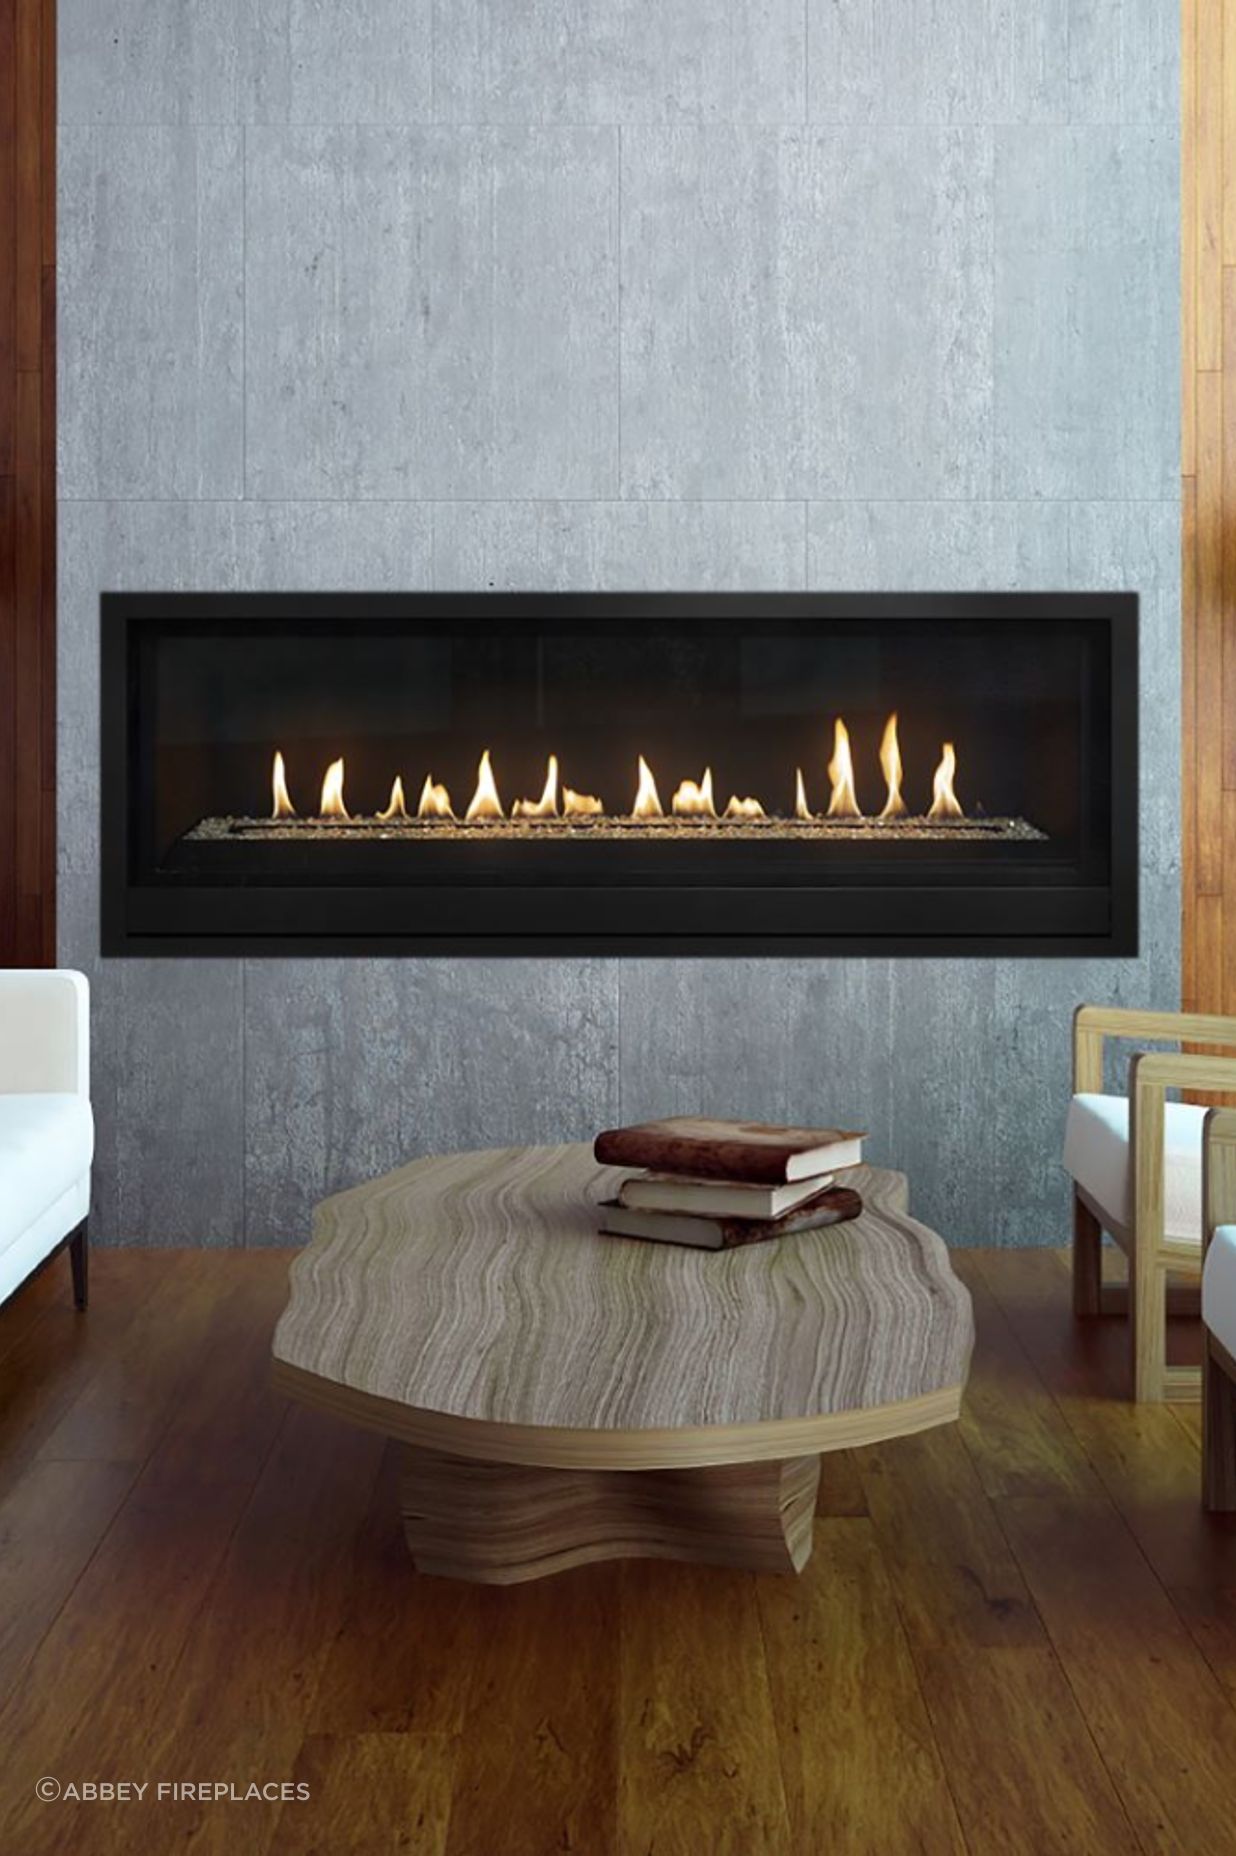 The Lopi Probuilder 54 GSB Gas Fireplace can be the centrepiece of a room.